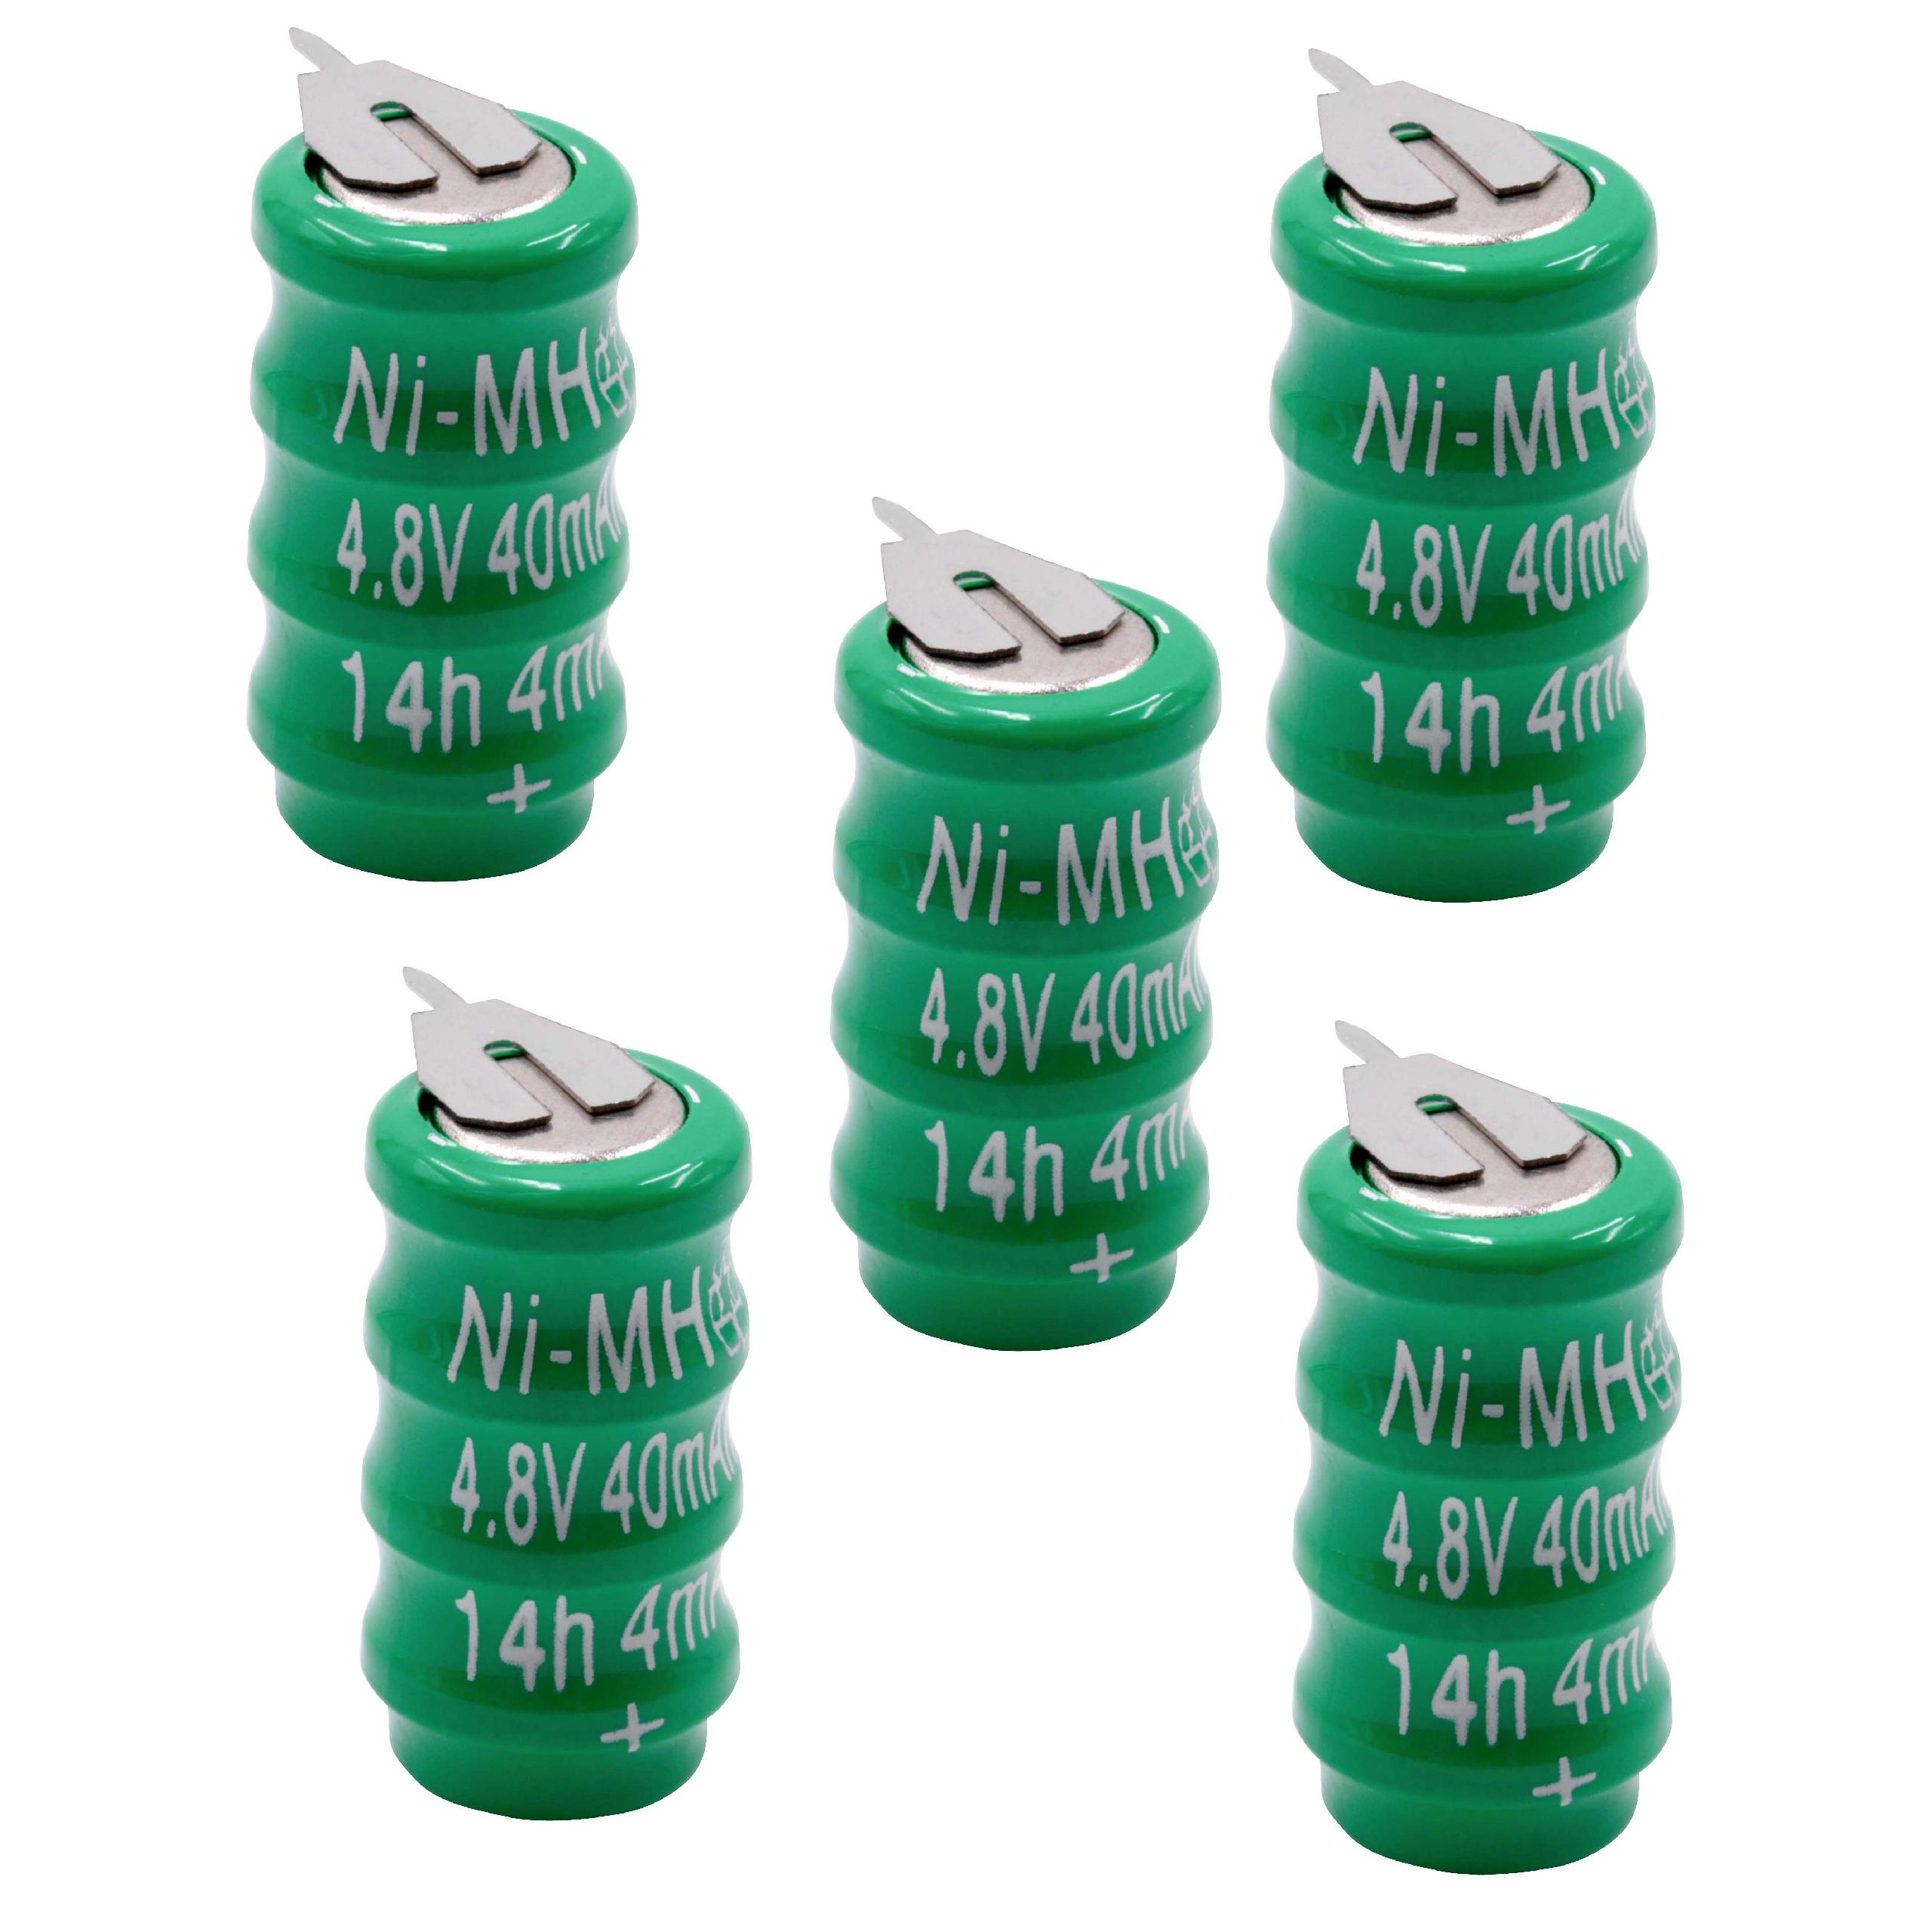 5x Button Cell Battery (4x Cell) Type V40H 2 Pins for Model Building Solar Lamps etc. - 40mAh 4.8V NiMH